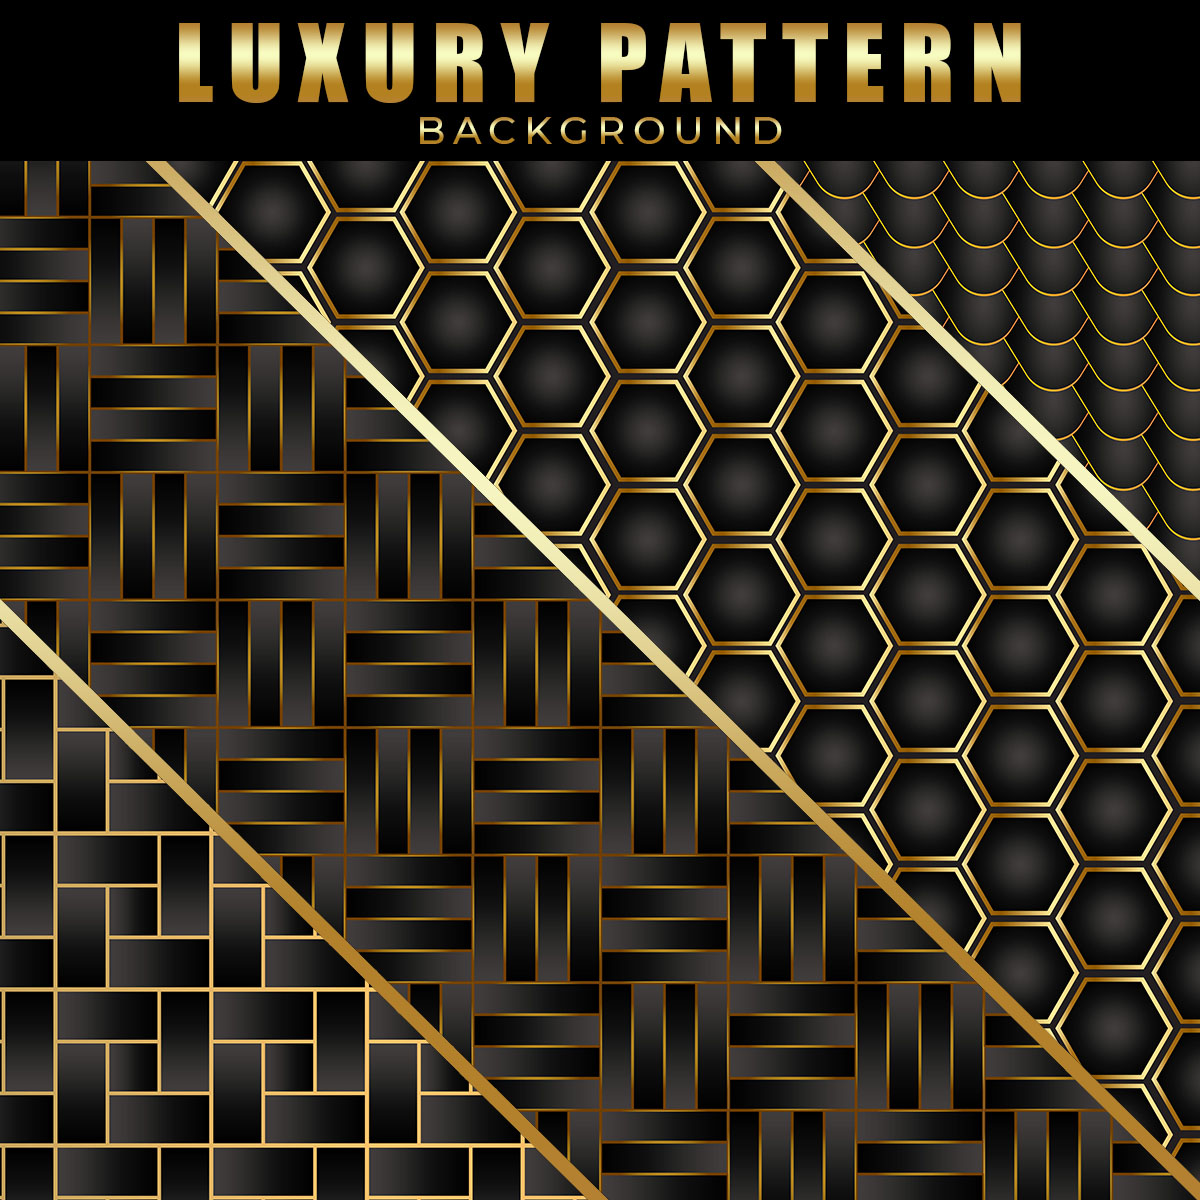 Luxury Pattern Background Collection examples.